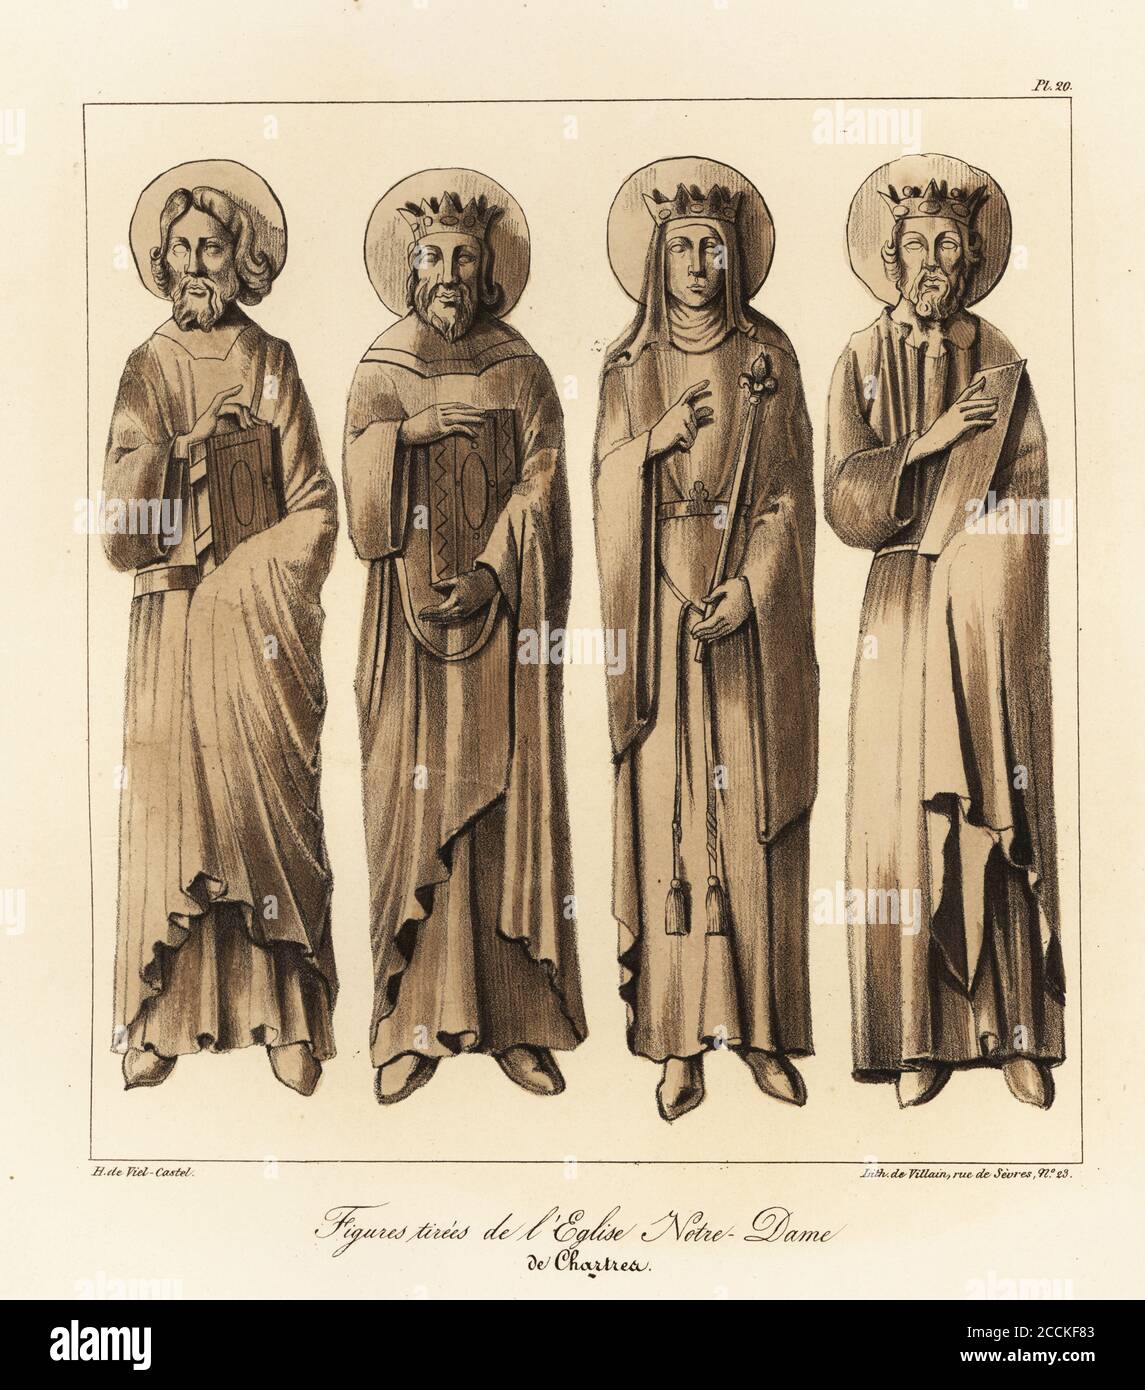 Male and female carved figures from Chartres Cathedral. Originally believed  to be Merovingian dynasty kings and queens. Figures tirees de l'Eglise  Notre Dame de Chartres. Tinted lithograph by Villain after an illustration